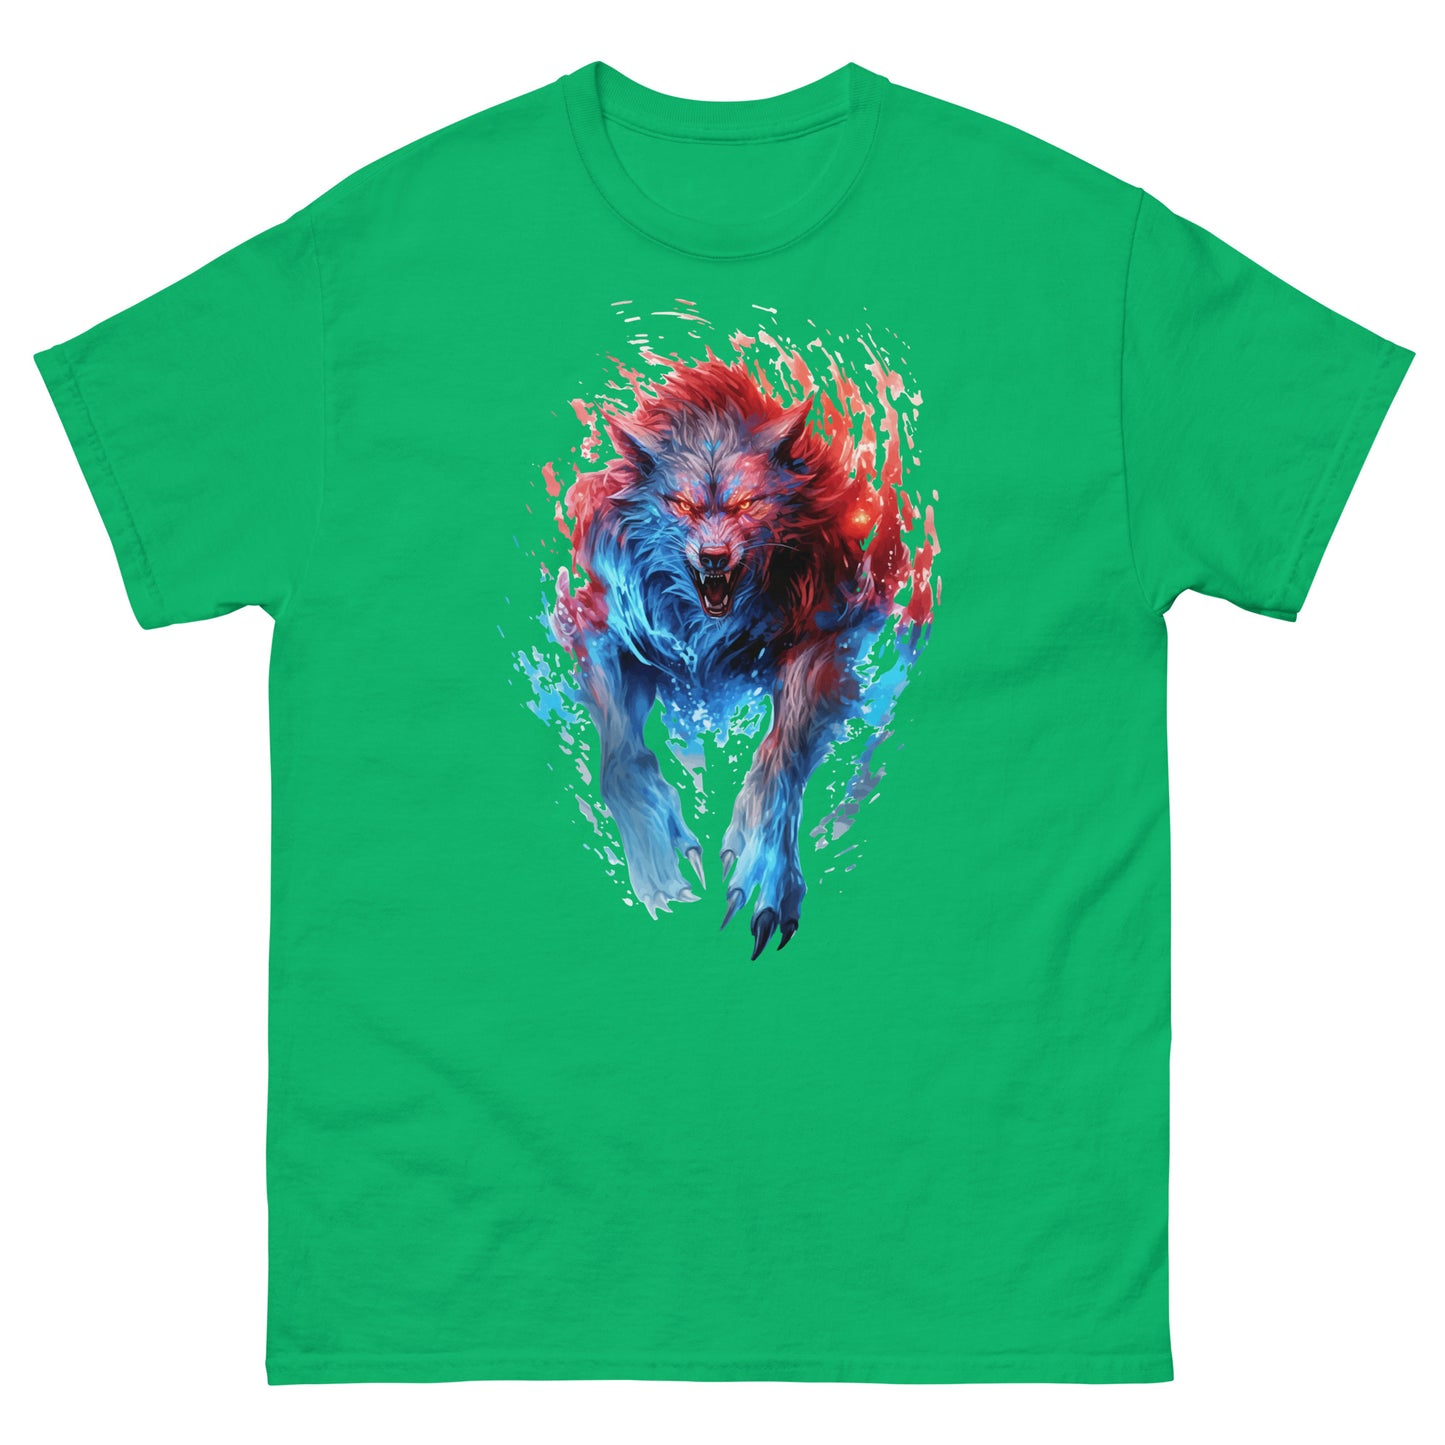 Fantastic wolf on fire, Fabulous and fantasy animals, Werewolf in blue and red flames, Mutant predator and claws of the beast - Men's classic tee